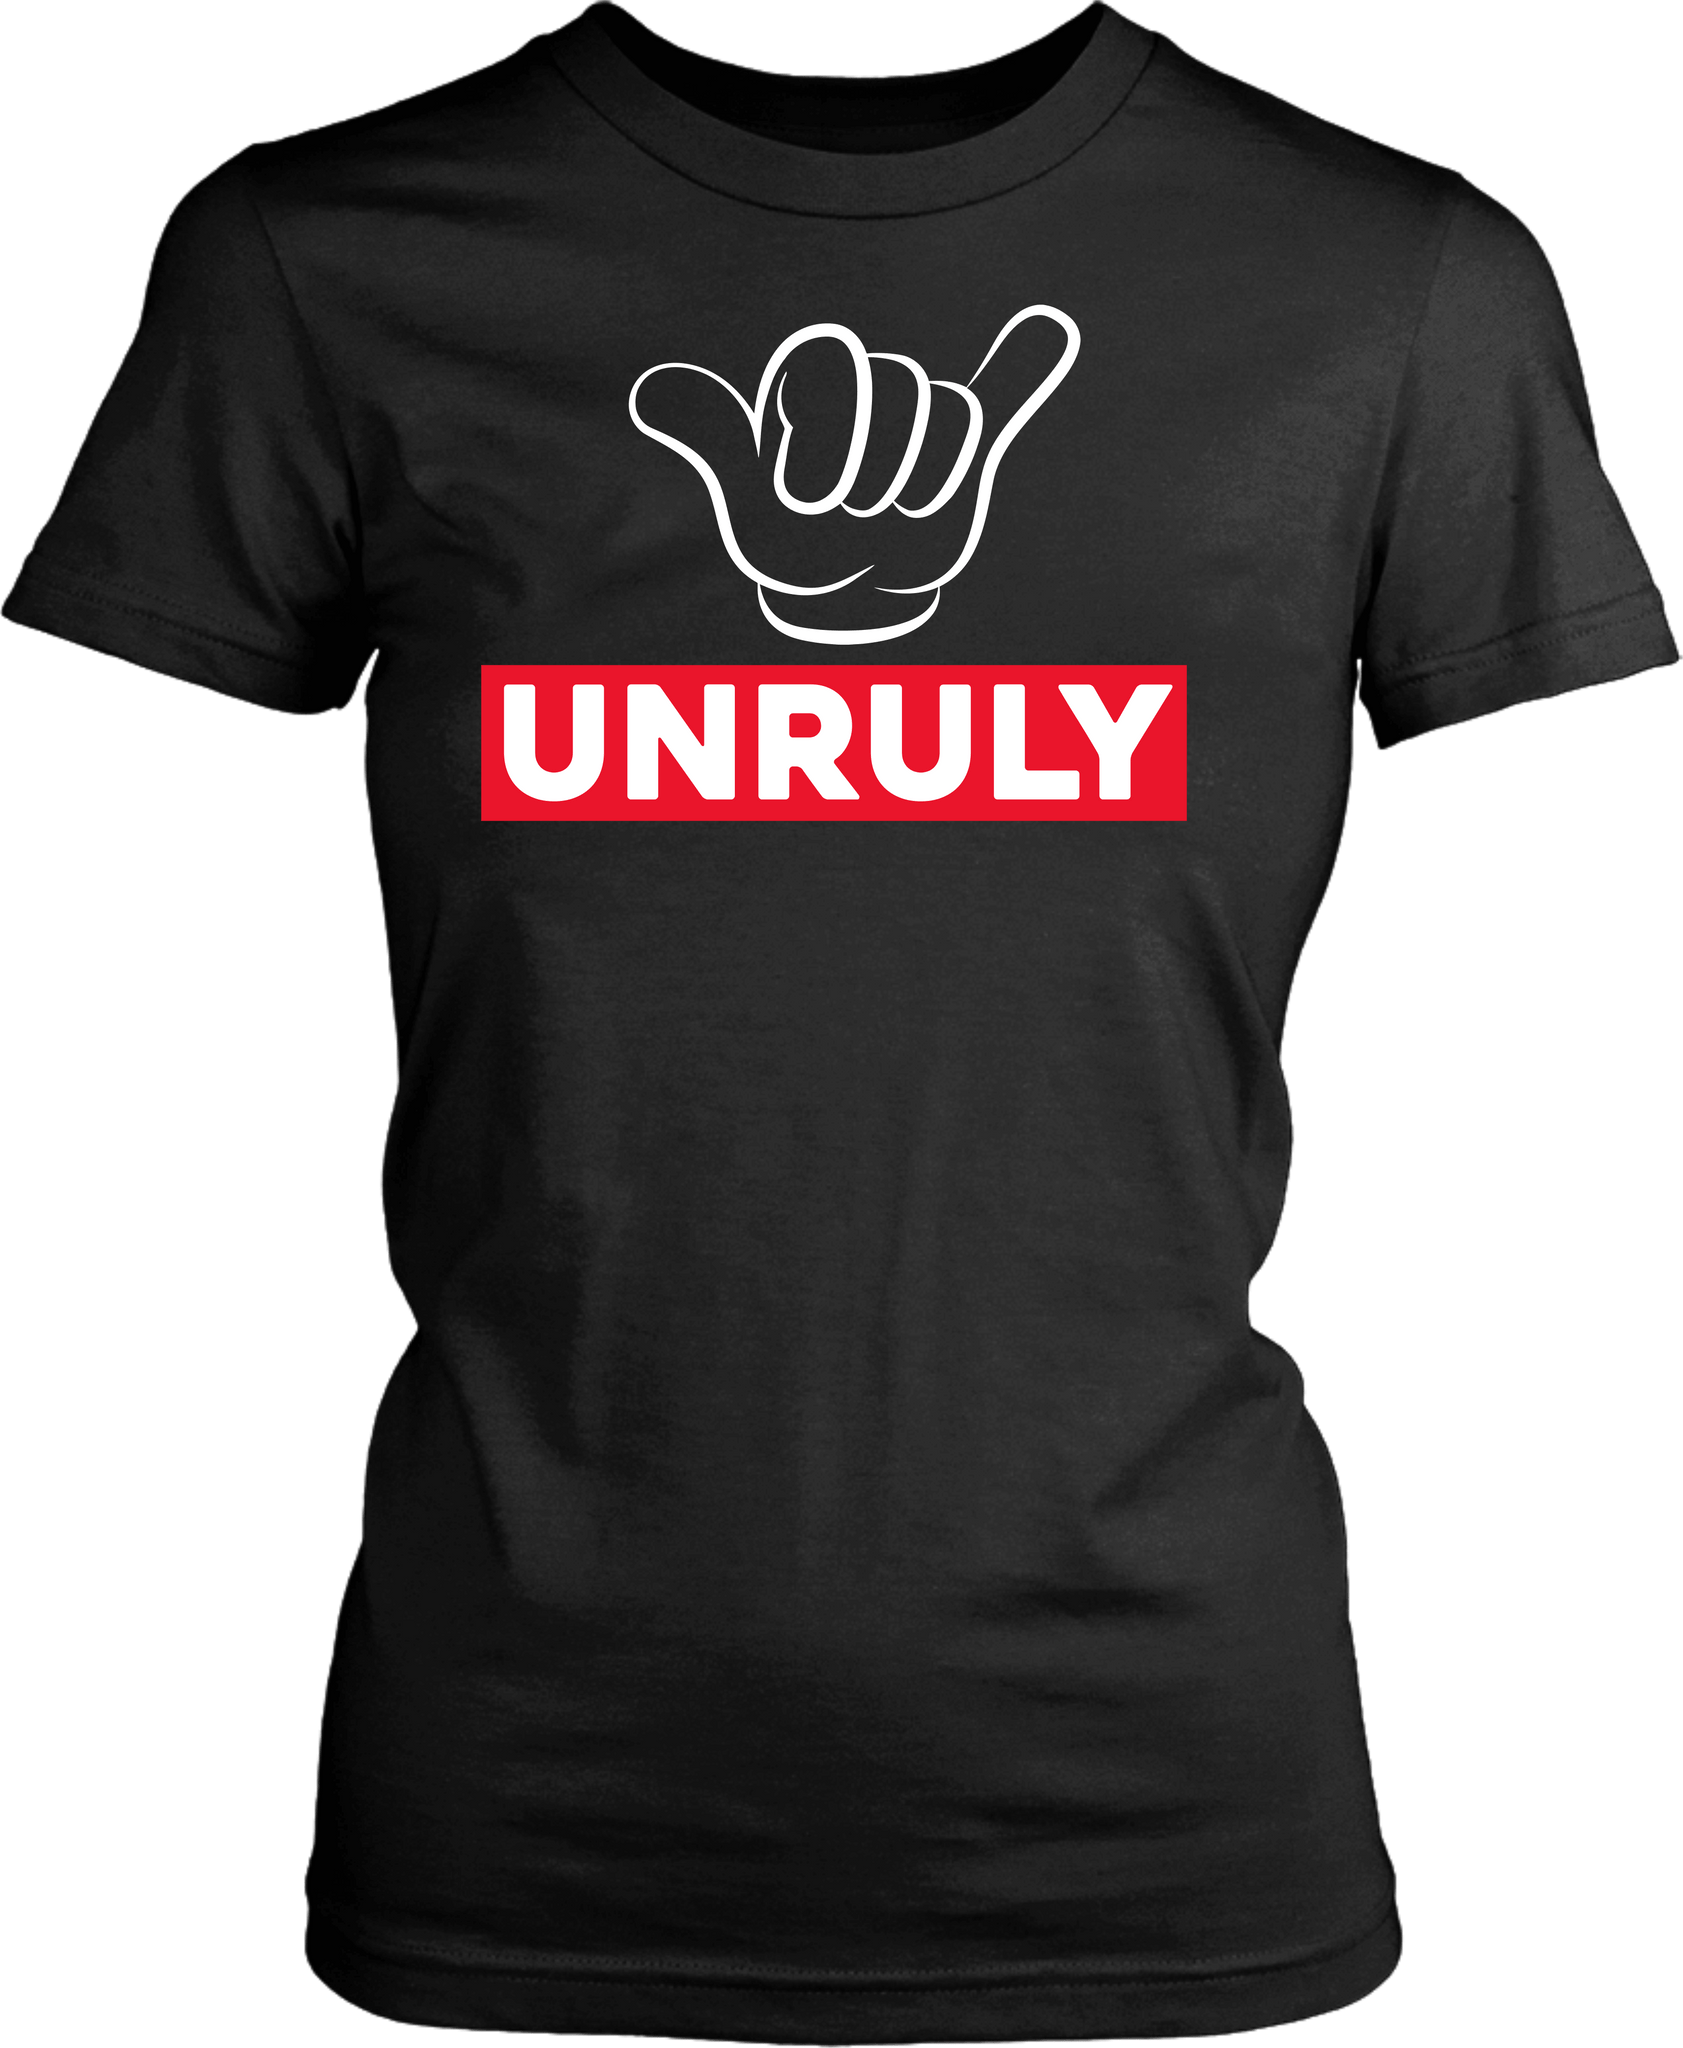 Black T-shirt Mock-up with Unruly and cartoon fingers design on the front available from the Xpert Apparel Store